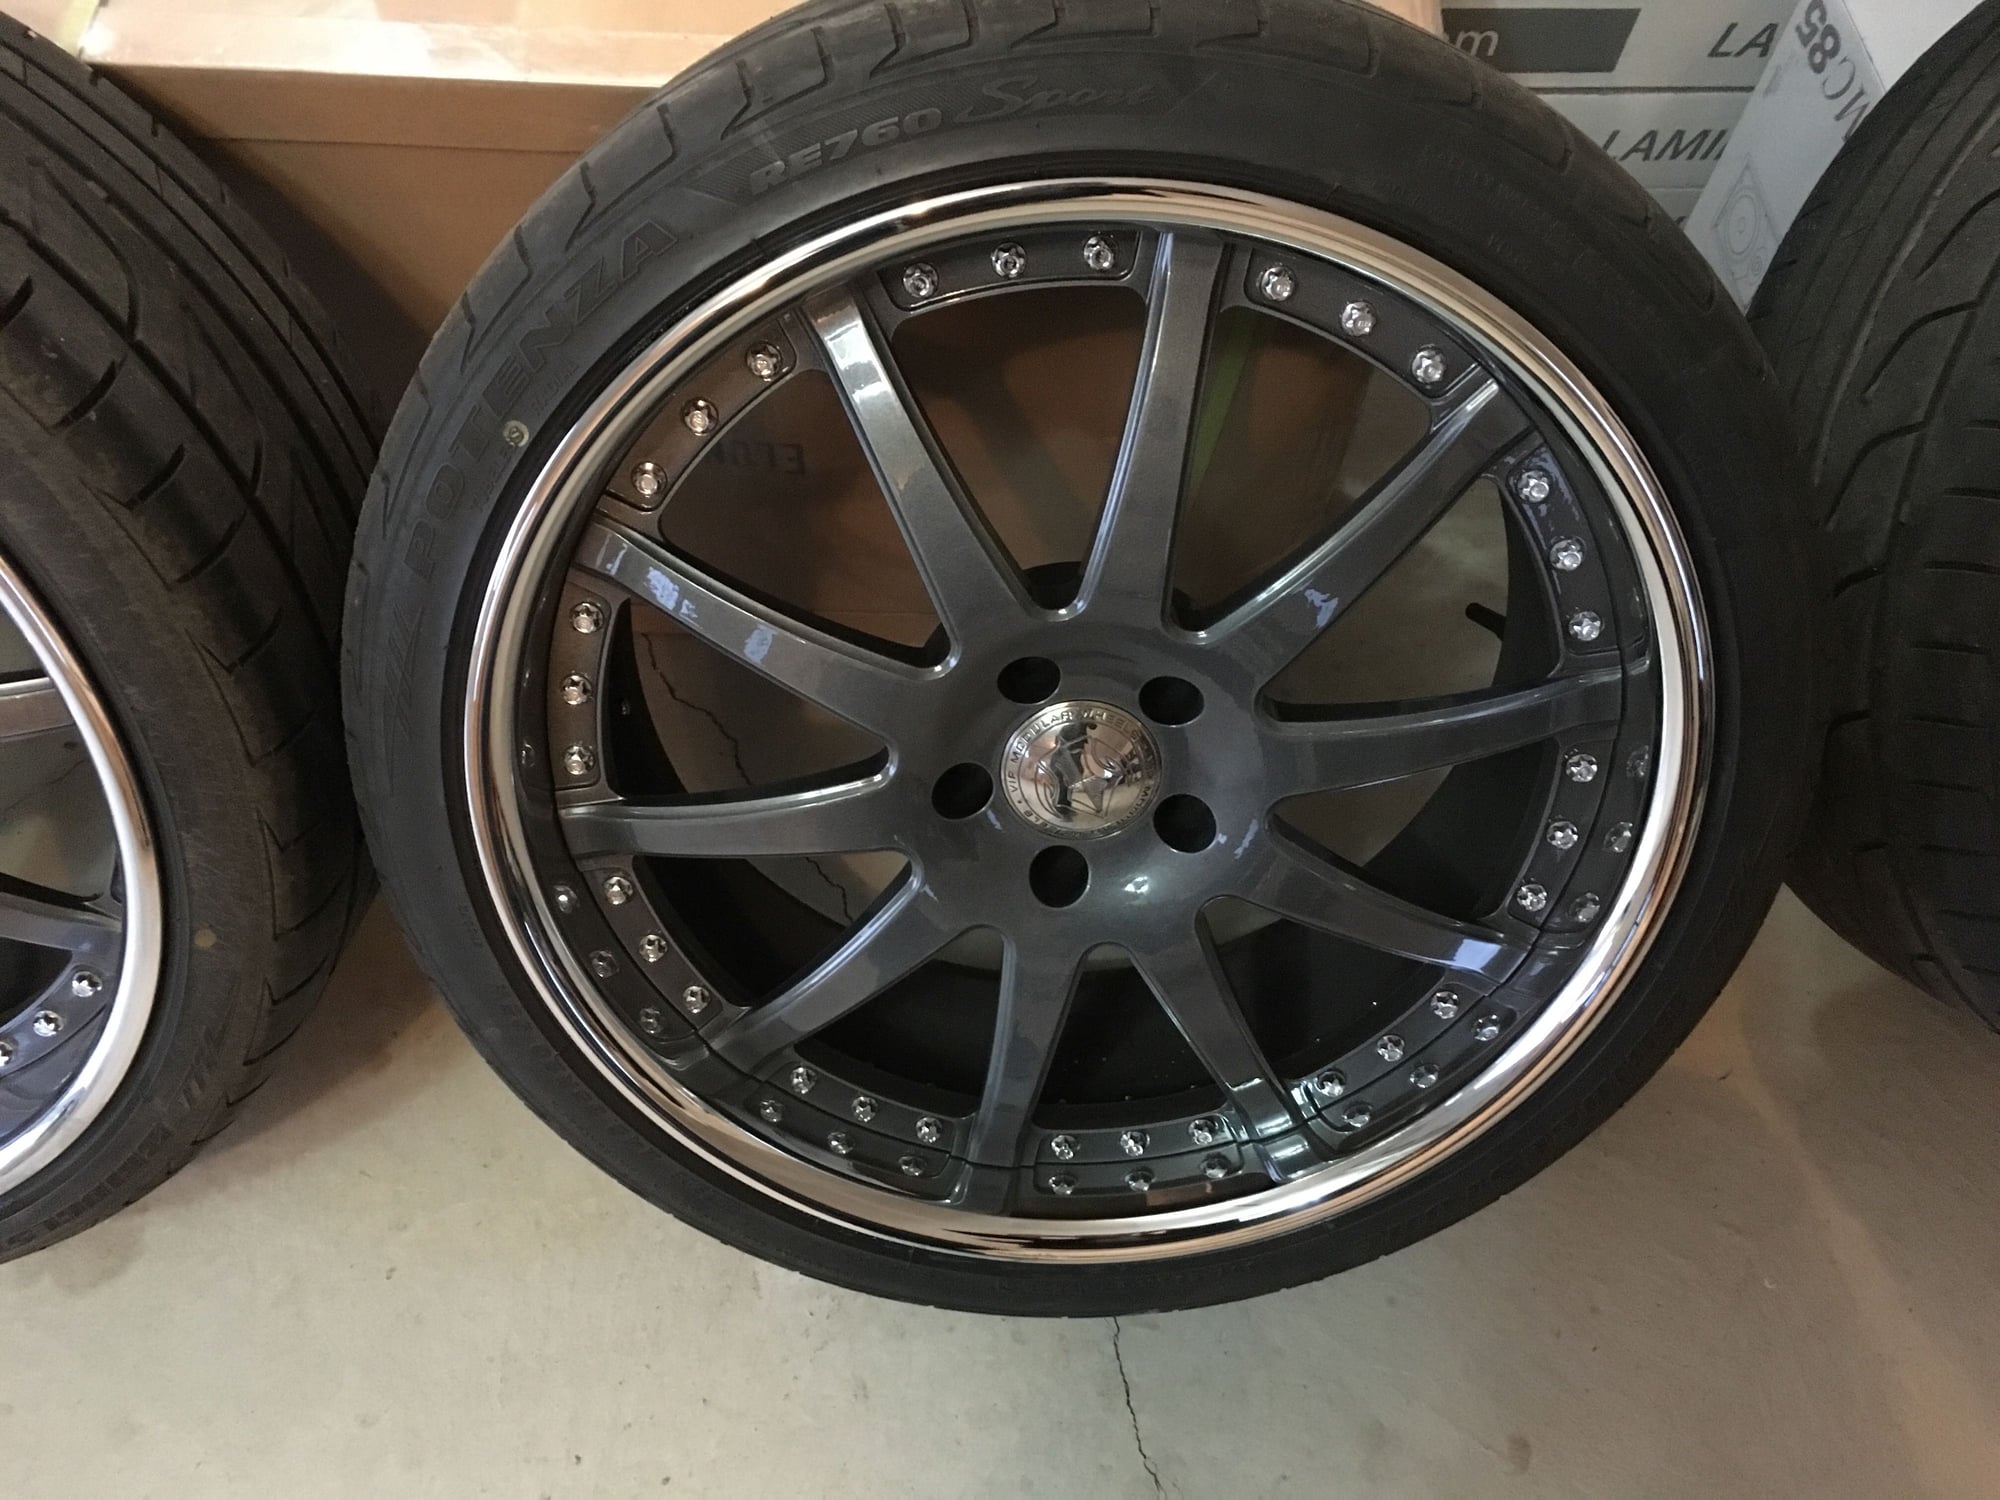 Wheels and Tires/Axles - 20" VIP Modular VR05 - Used - 2004 to 2014 Mercedes-Benz E63 AMG - Milton, ON L9E0G9, Canada